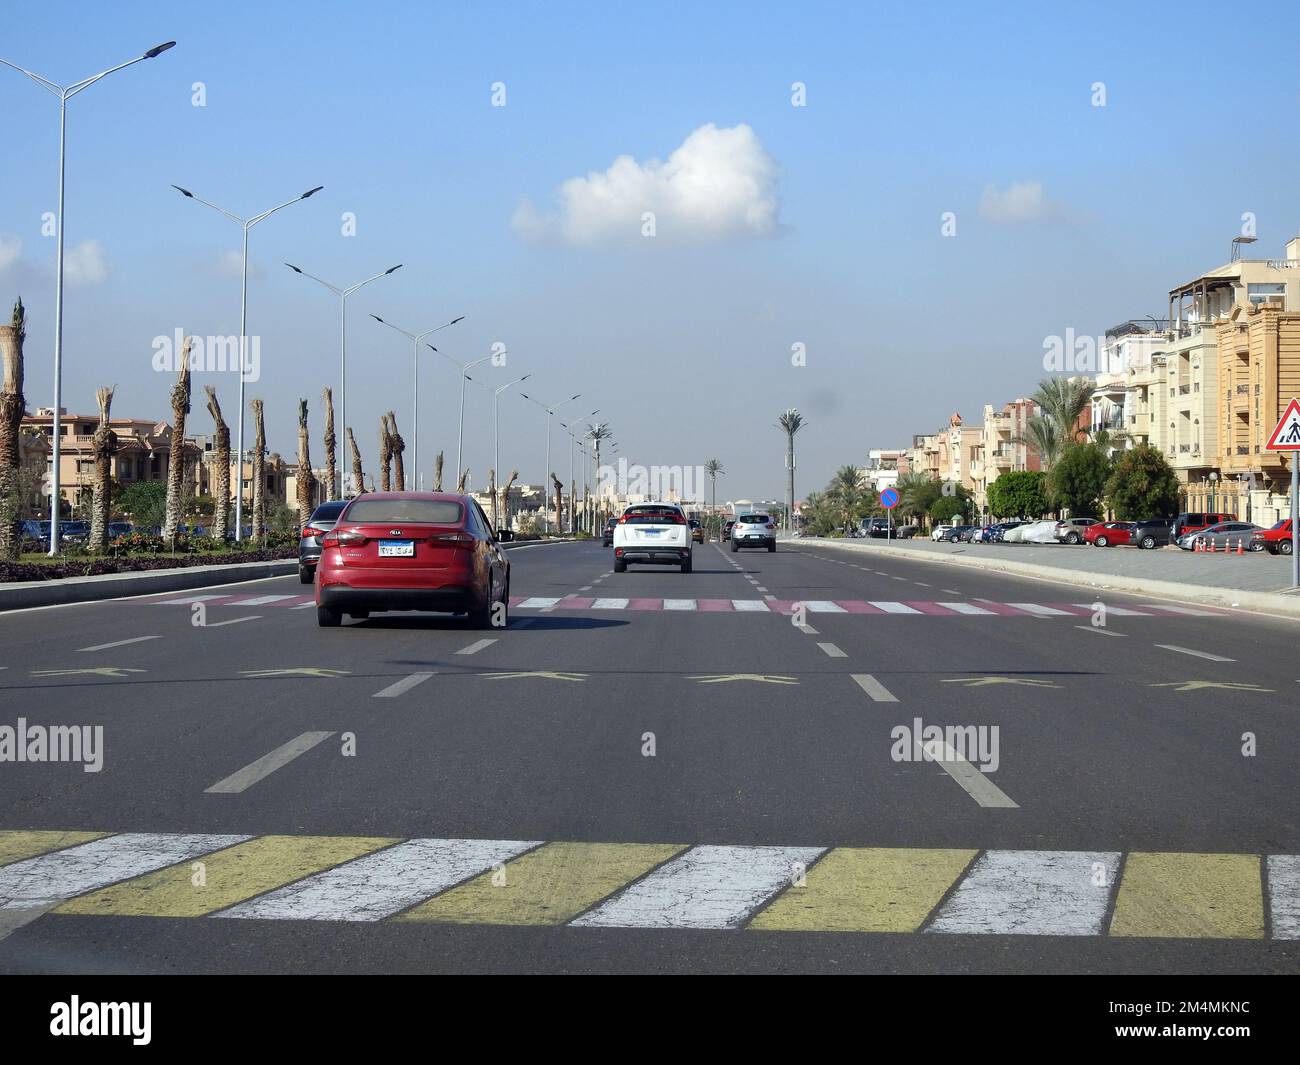 Cairo, Egypt, December 7 2022: Pedestrian crossing area on a highway road axis in Egypt with instructive paint on the asphalt and a road sign to instr Stock Photo